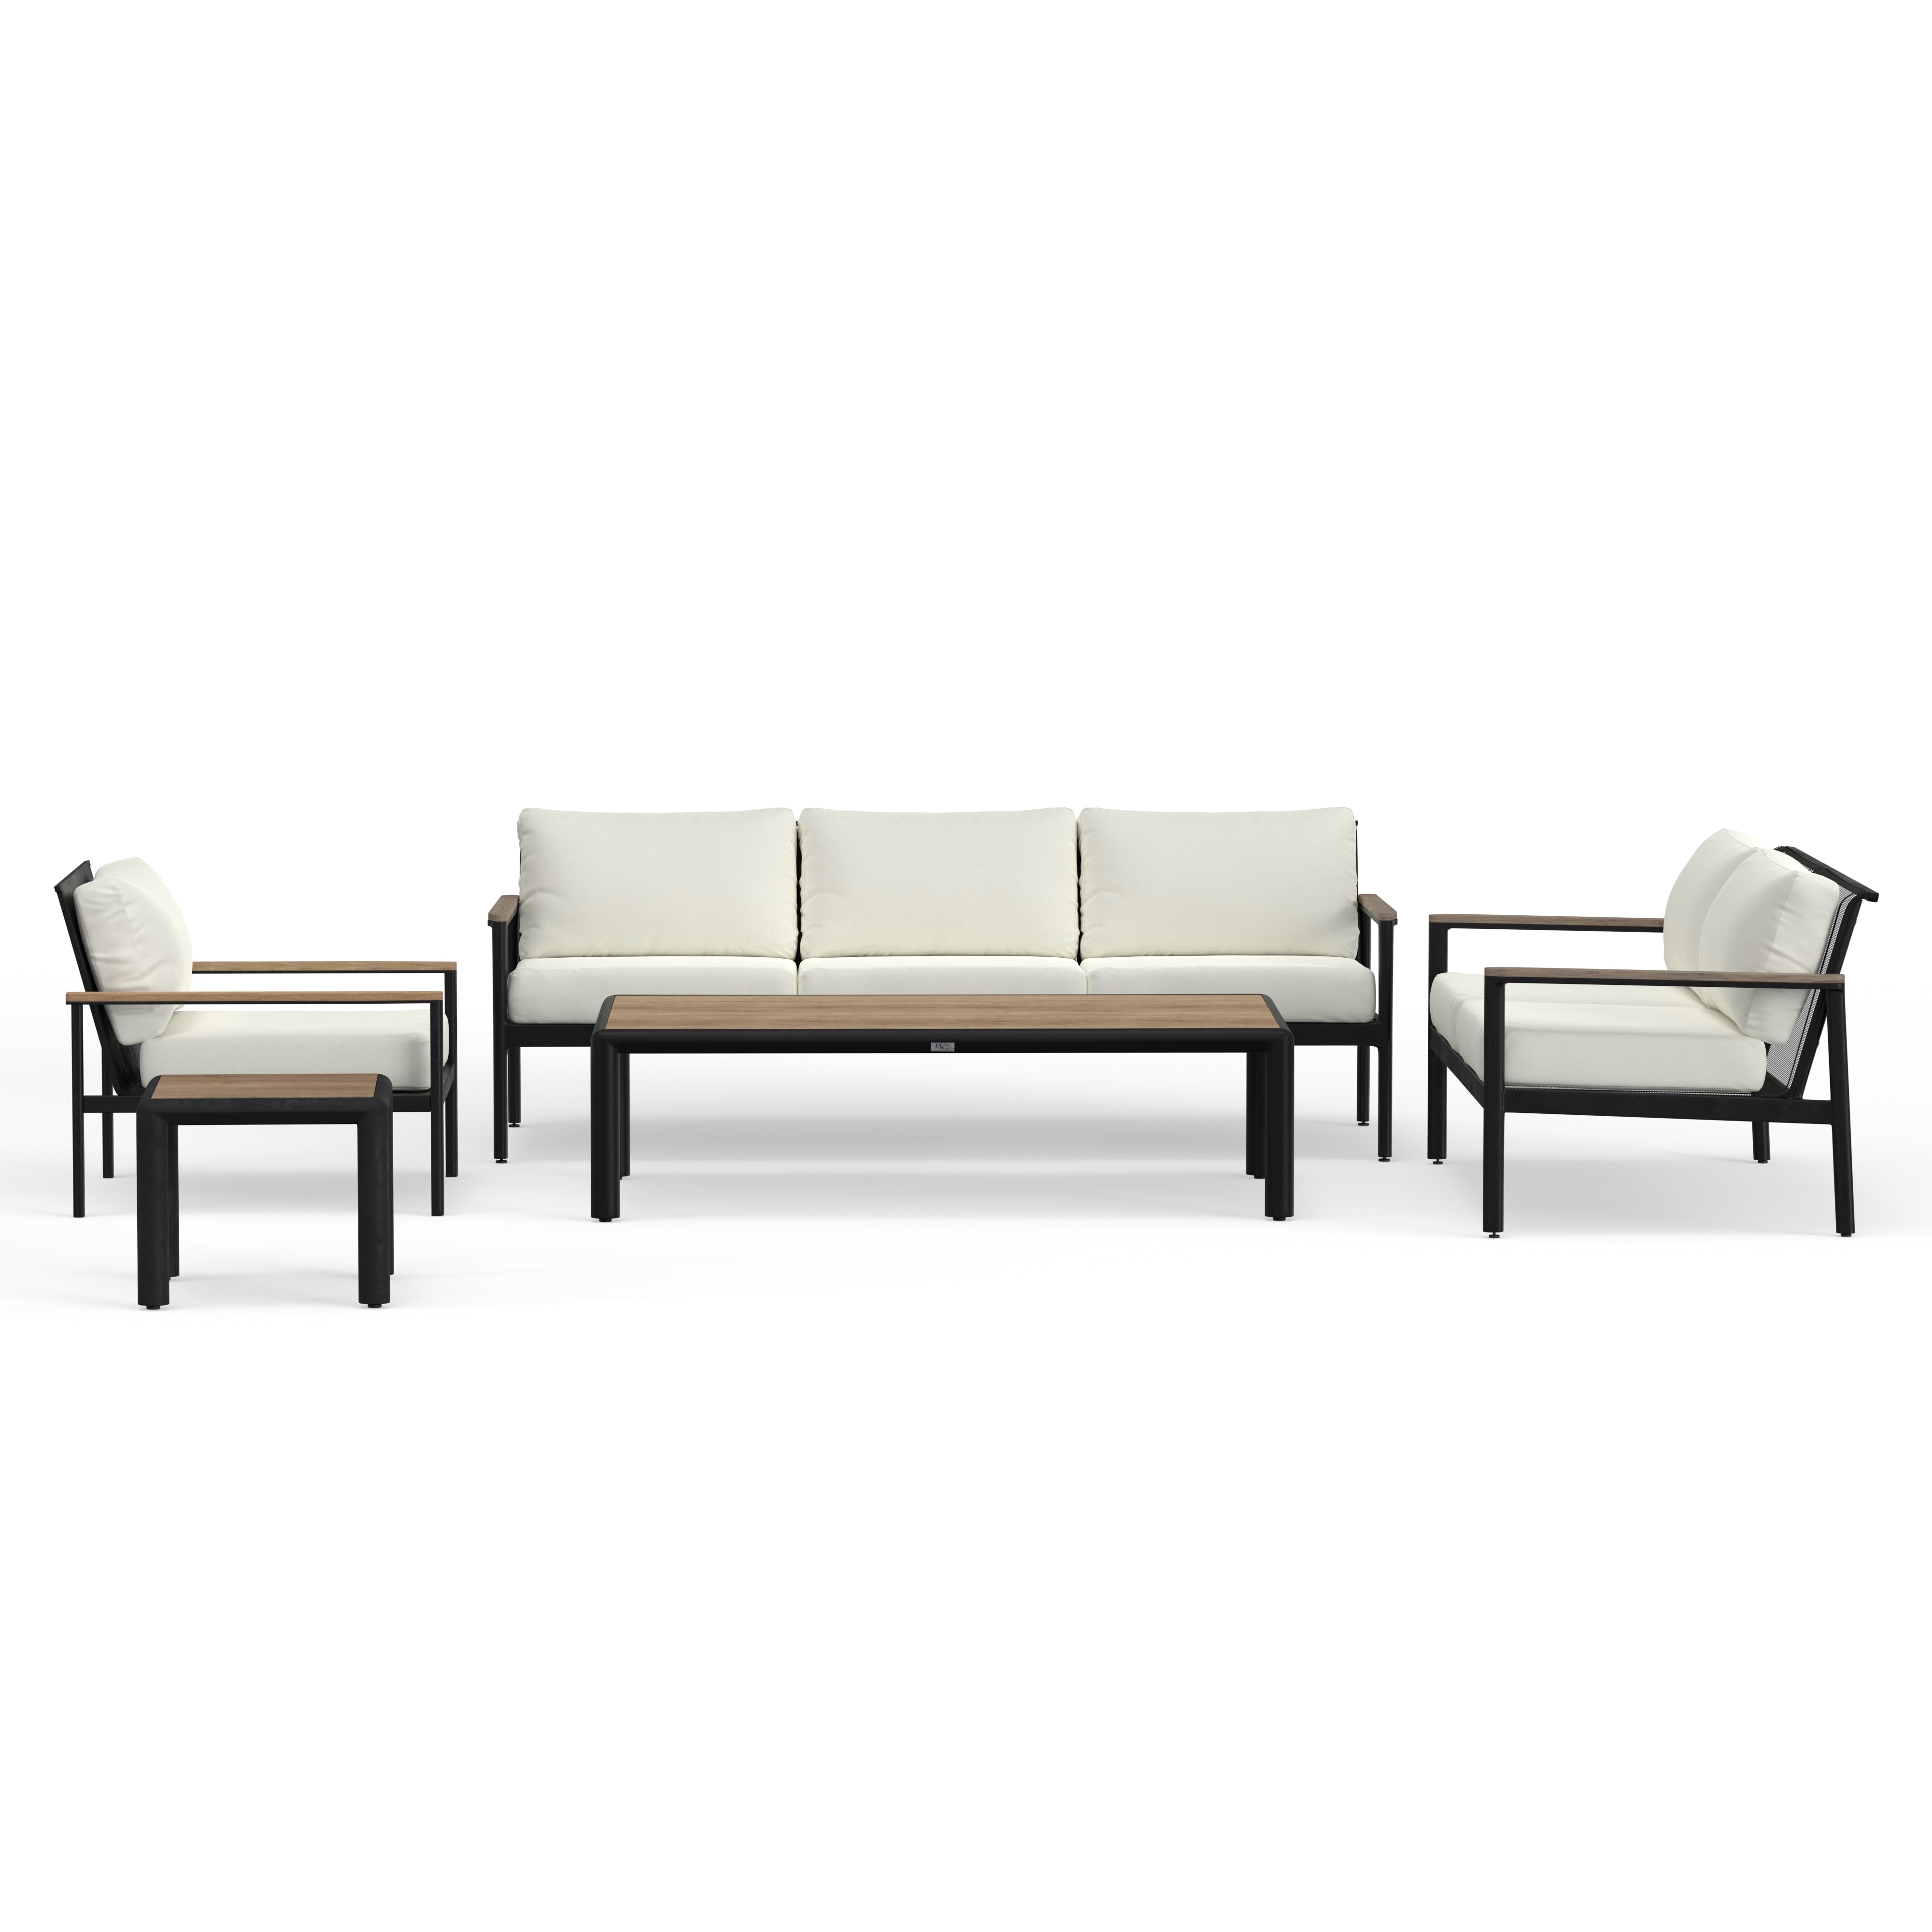 Best Outdoor Seating Set For Six In Black Aluminum